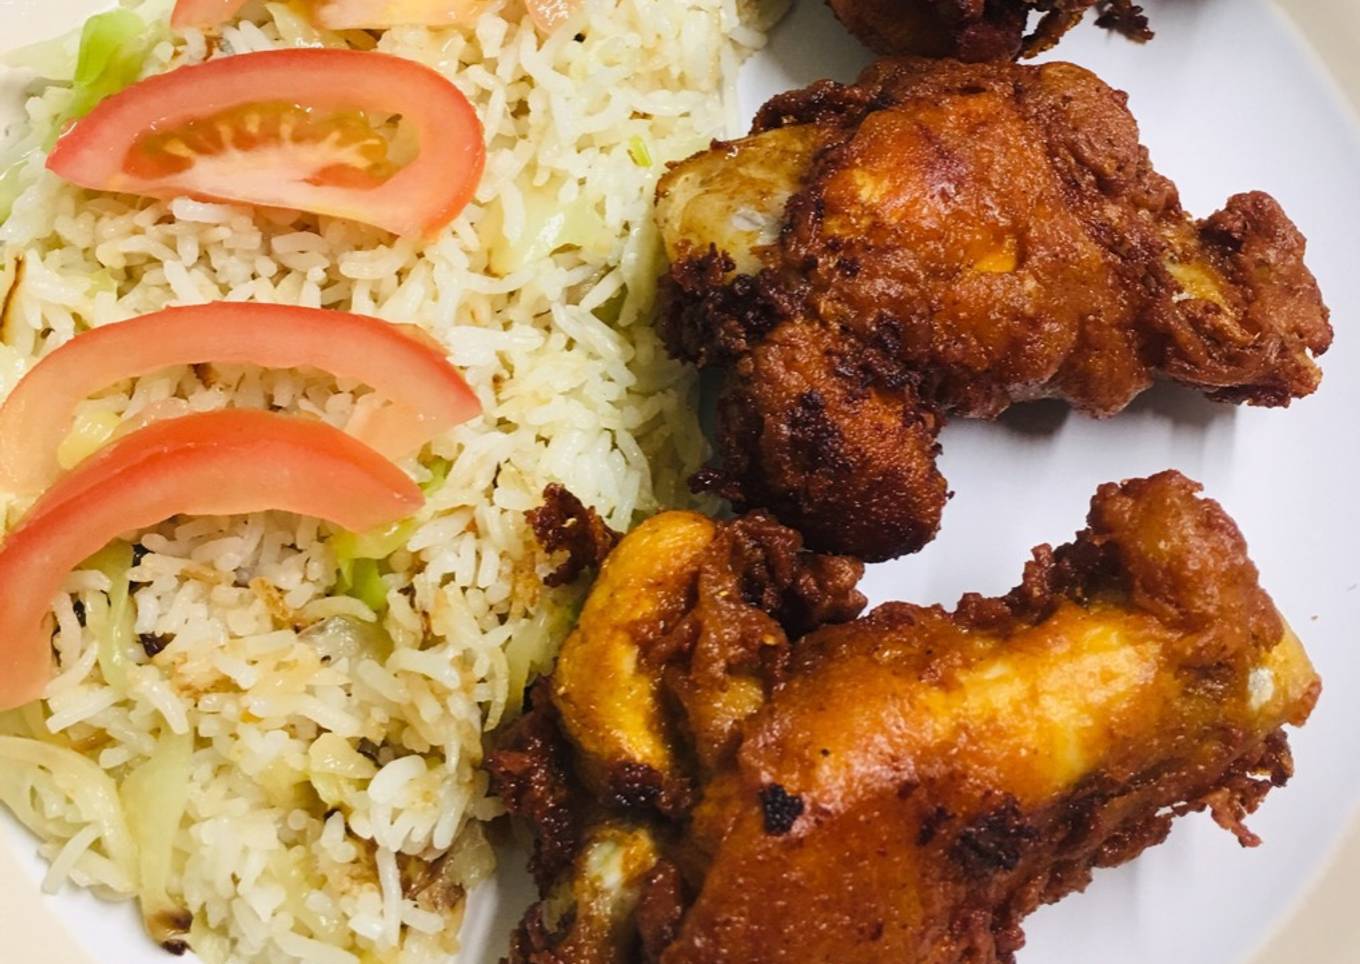 Garlic fried rice with crispy chicken wings